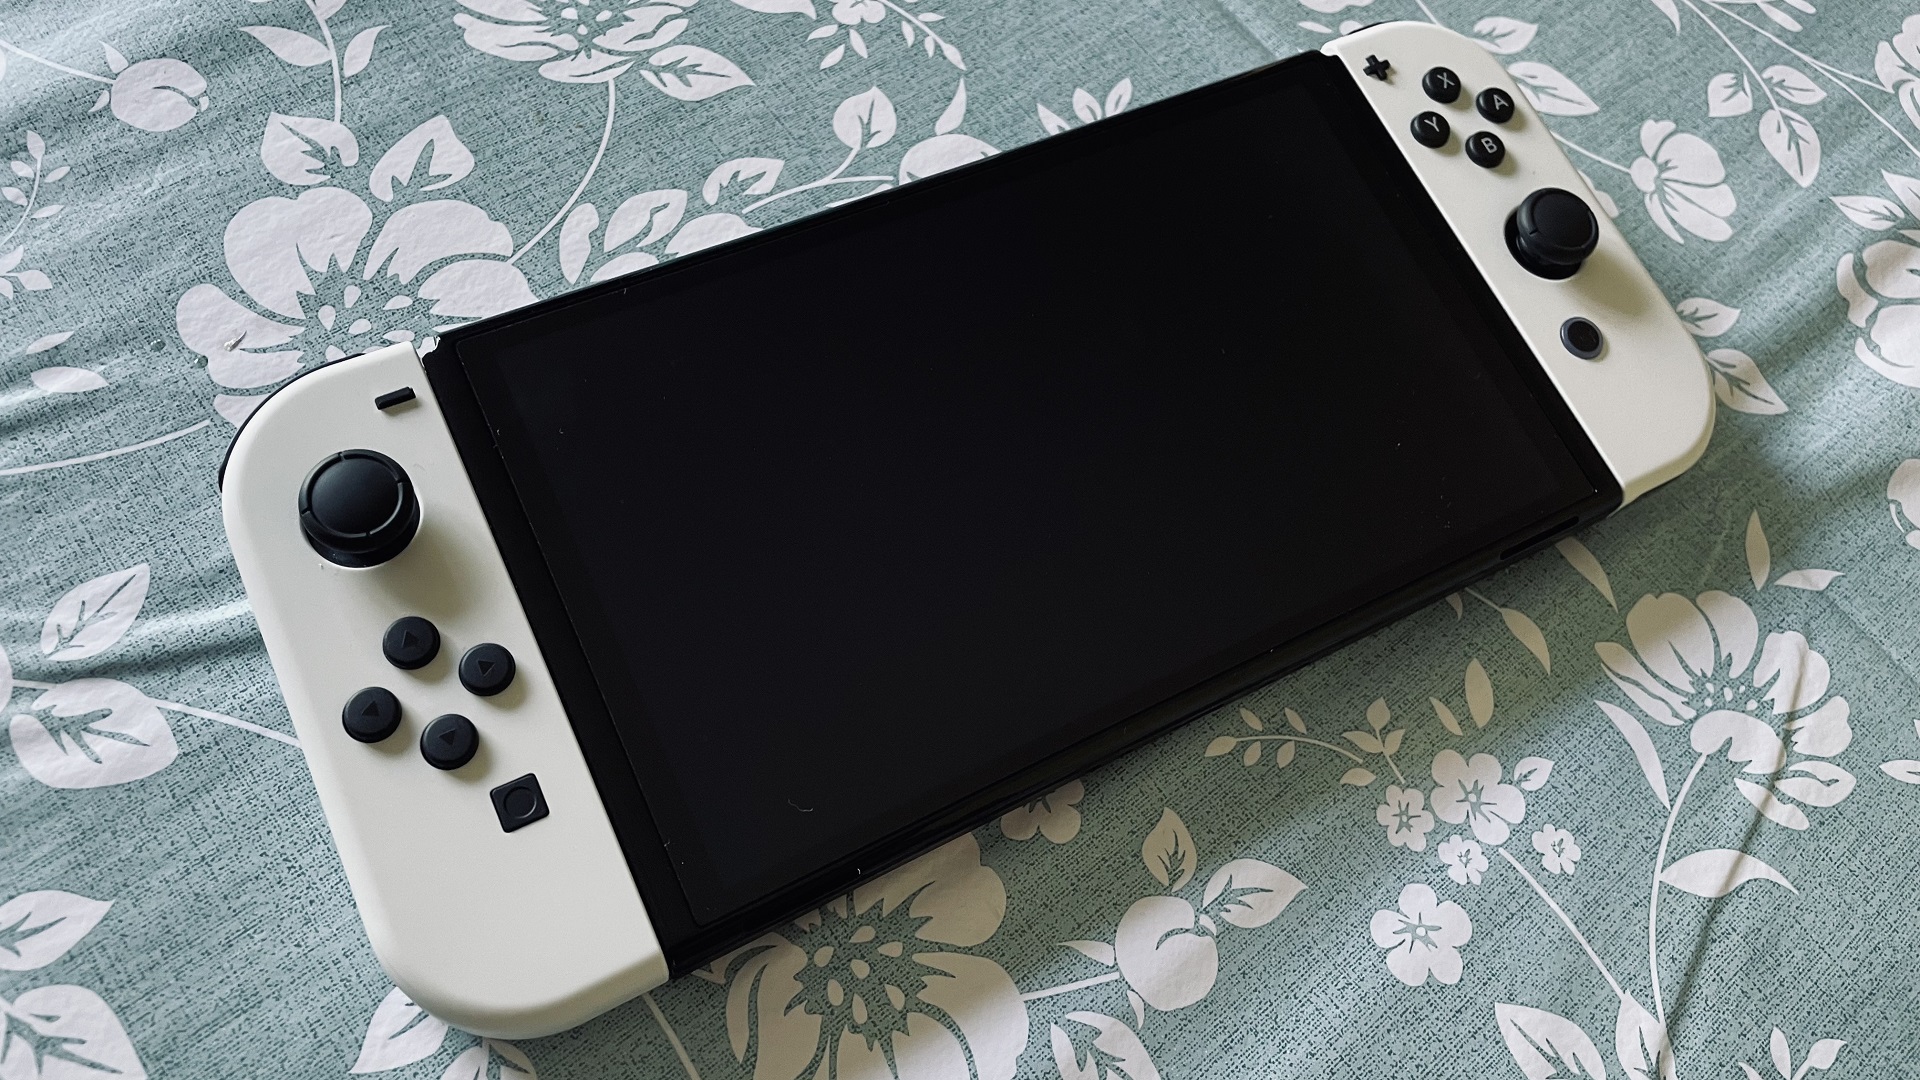 Nintendo Switch OLED review: the best Switch yet | Pocket Tactics